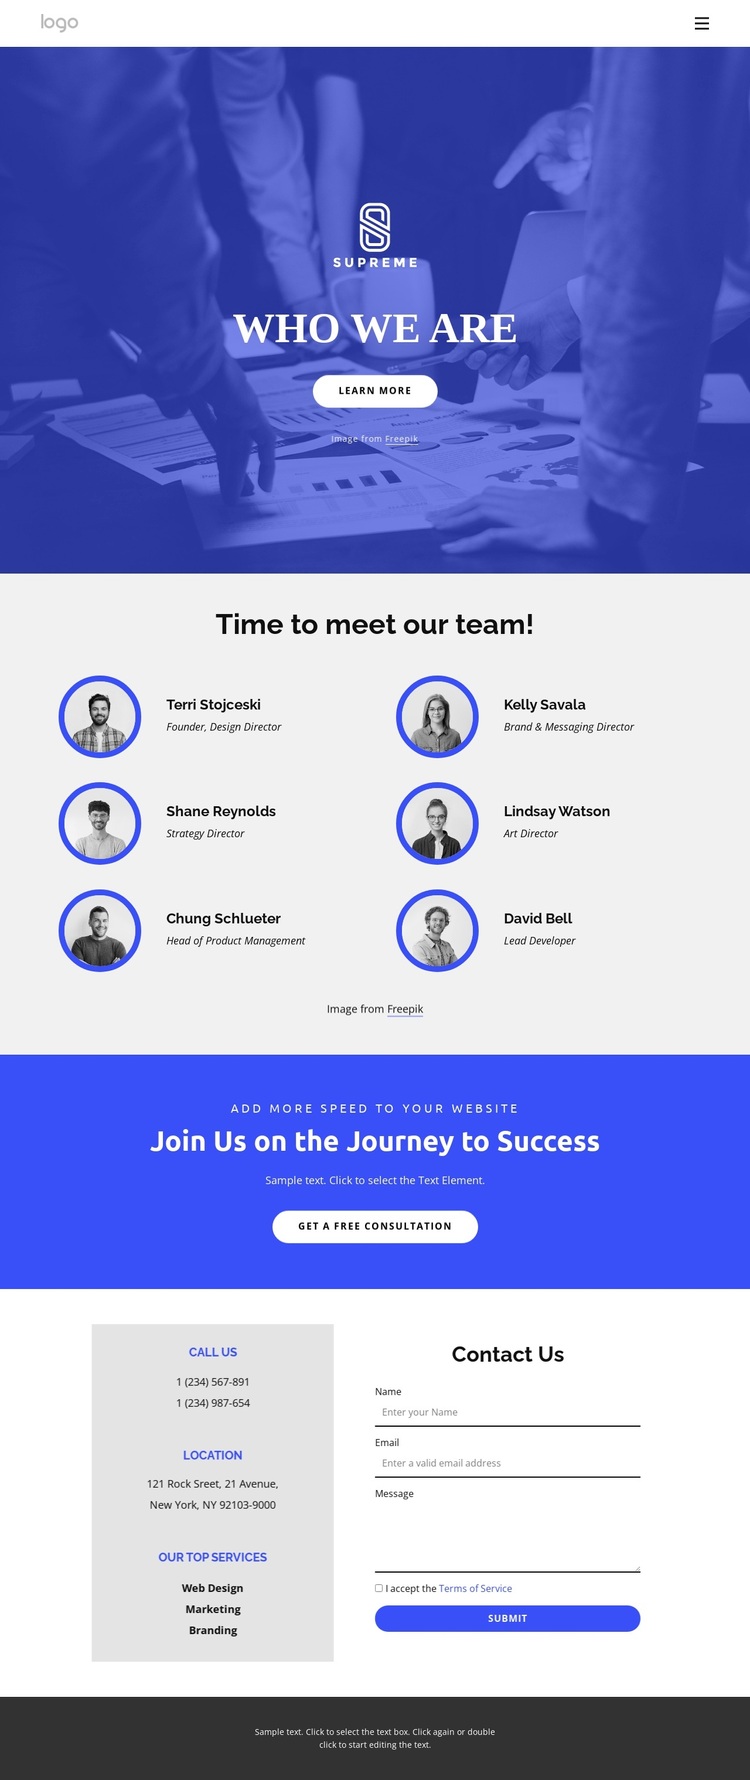 Time to meet our amazing team Joomla Page Builder